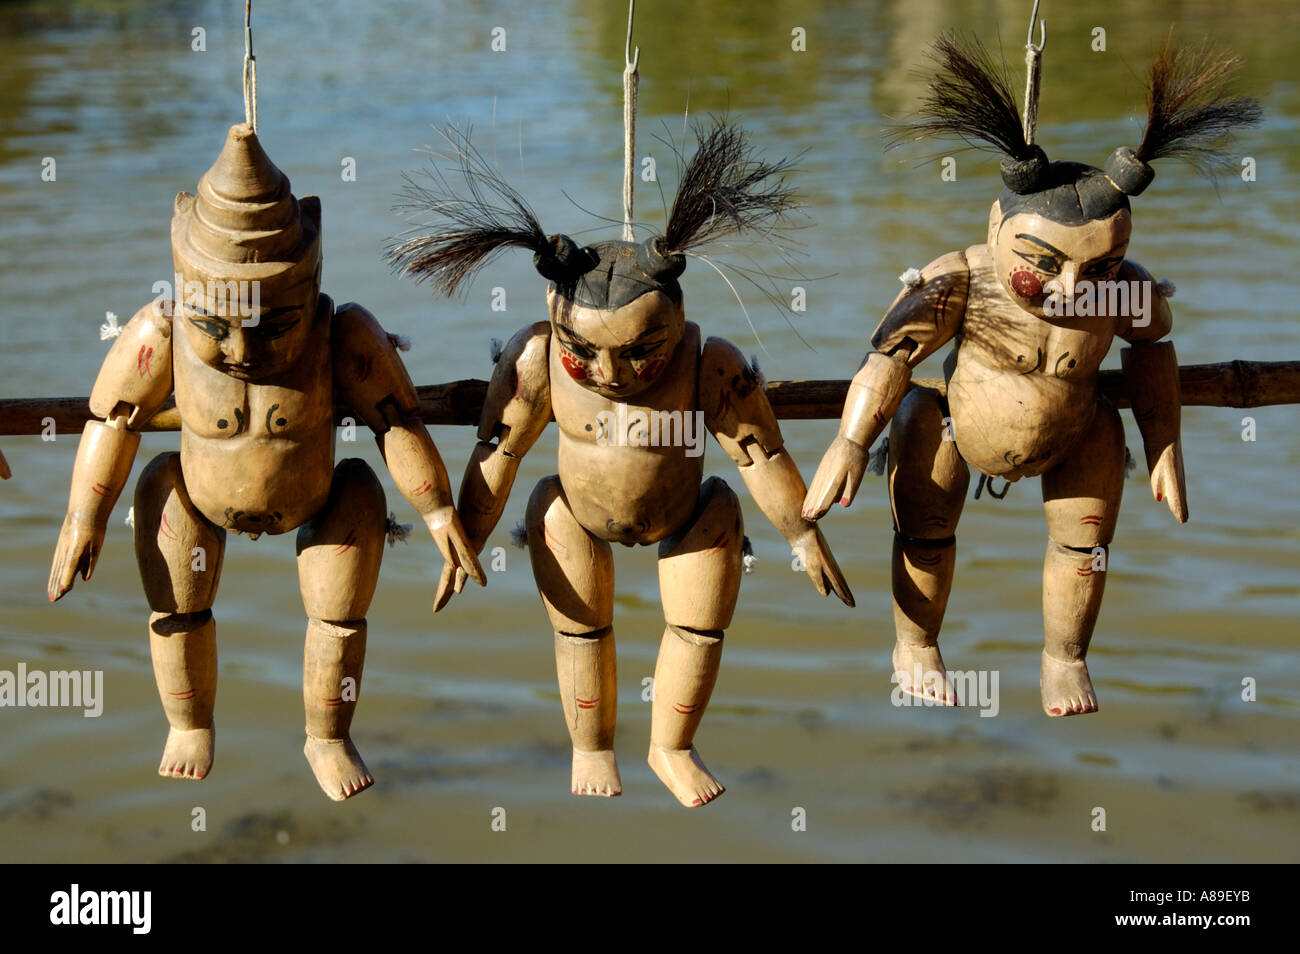 Three wooden puppets above water Inle Lake Shan State Burma Stock Photo